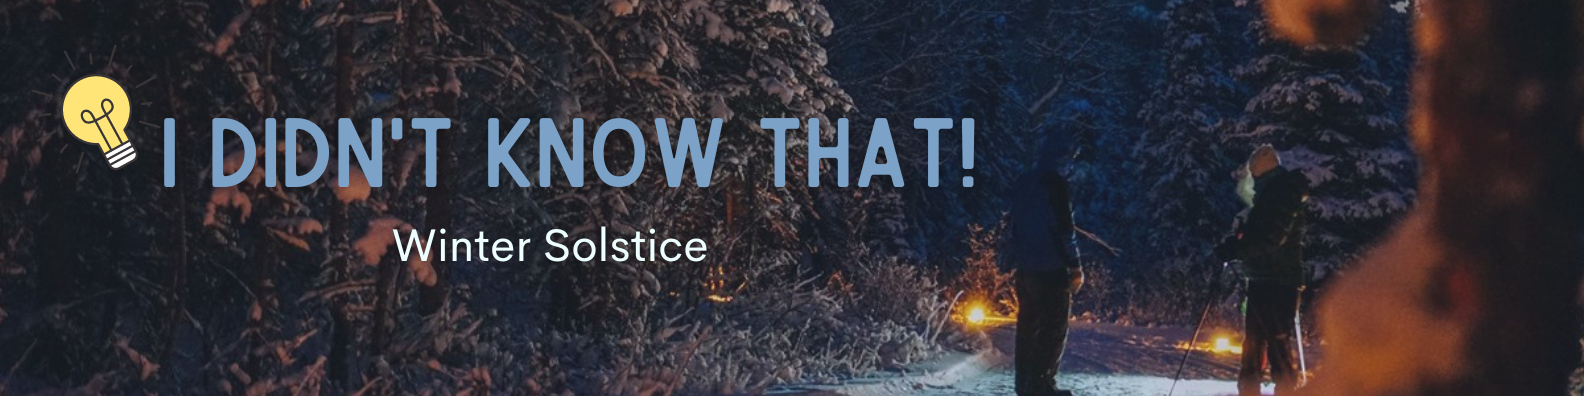 I Didn't Know That! Winter Solstice